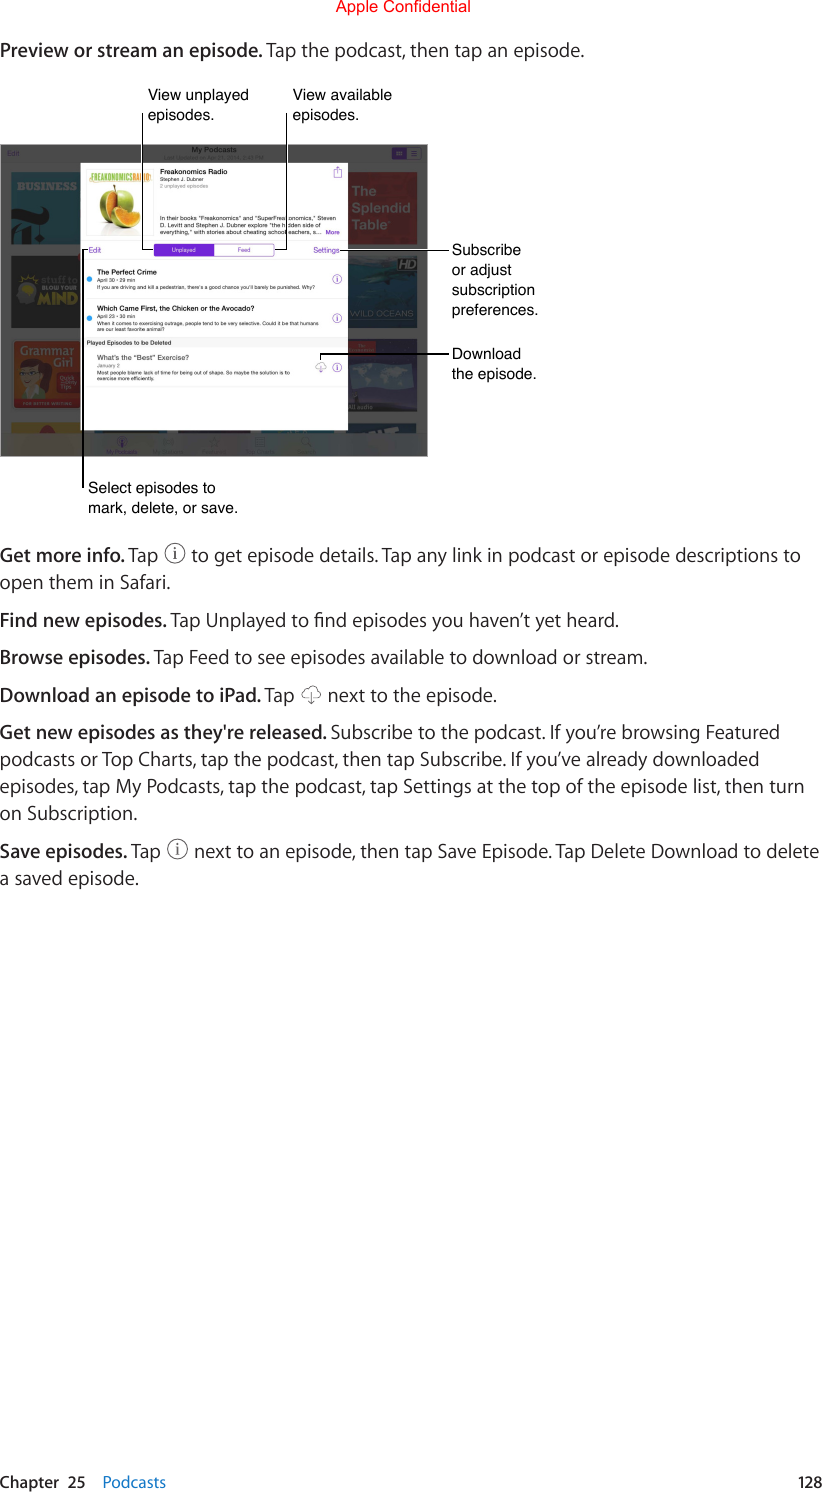 Chapter  25    Podcasts  128Preview or stream an episode. Tap the podcast, then tap an episode.Subscribe or adjust subscription preferences.Subscribe or adjust subscription preferences.Download the episode.Download the episode.Select episodes to mark, delete, or save.Select episodes to mark, delete, or save.View unplayed episodes.View unplayed episodes.View available episodes.View available episodes.Get more info. Tap   to get episode details. Tap any link in podcast or episode descriptions to open them in Safari.Find new episodes. TapUnplayedtondepisodesyouhaven’tyetheard.Browse episodes. Tap Feed to see episodes available to download or stream.Download an episode to iPad. Tap   next to the episode.Get new episodes as they&apos;re released. Subscribe to the podcast. If you’re browsing Featured podcasts or Top Charts, tap the podcast, then tap Subscribe. If you’ve already downloaded episodes, tap My Podcasts, tap the podcast, tap Settings at the top of the episode list, then turn on Subscription.Save episodes. Tap   next to an episode, then tap Save Episode. Tap Delete Download to delete a saved episode.Apple Confidential